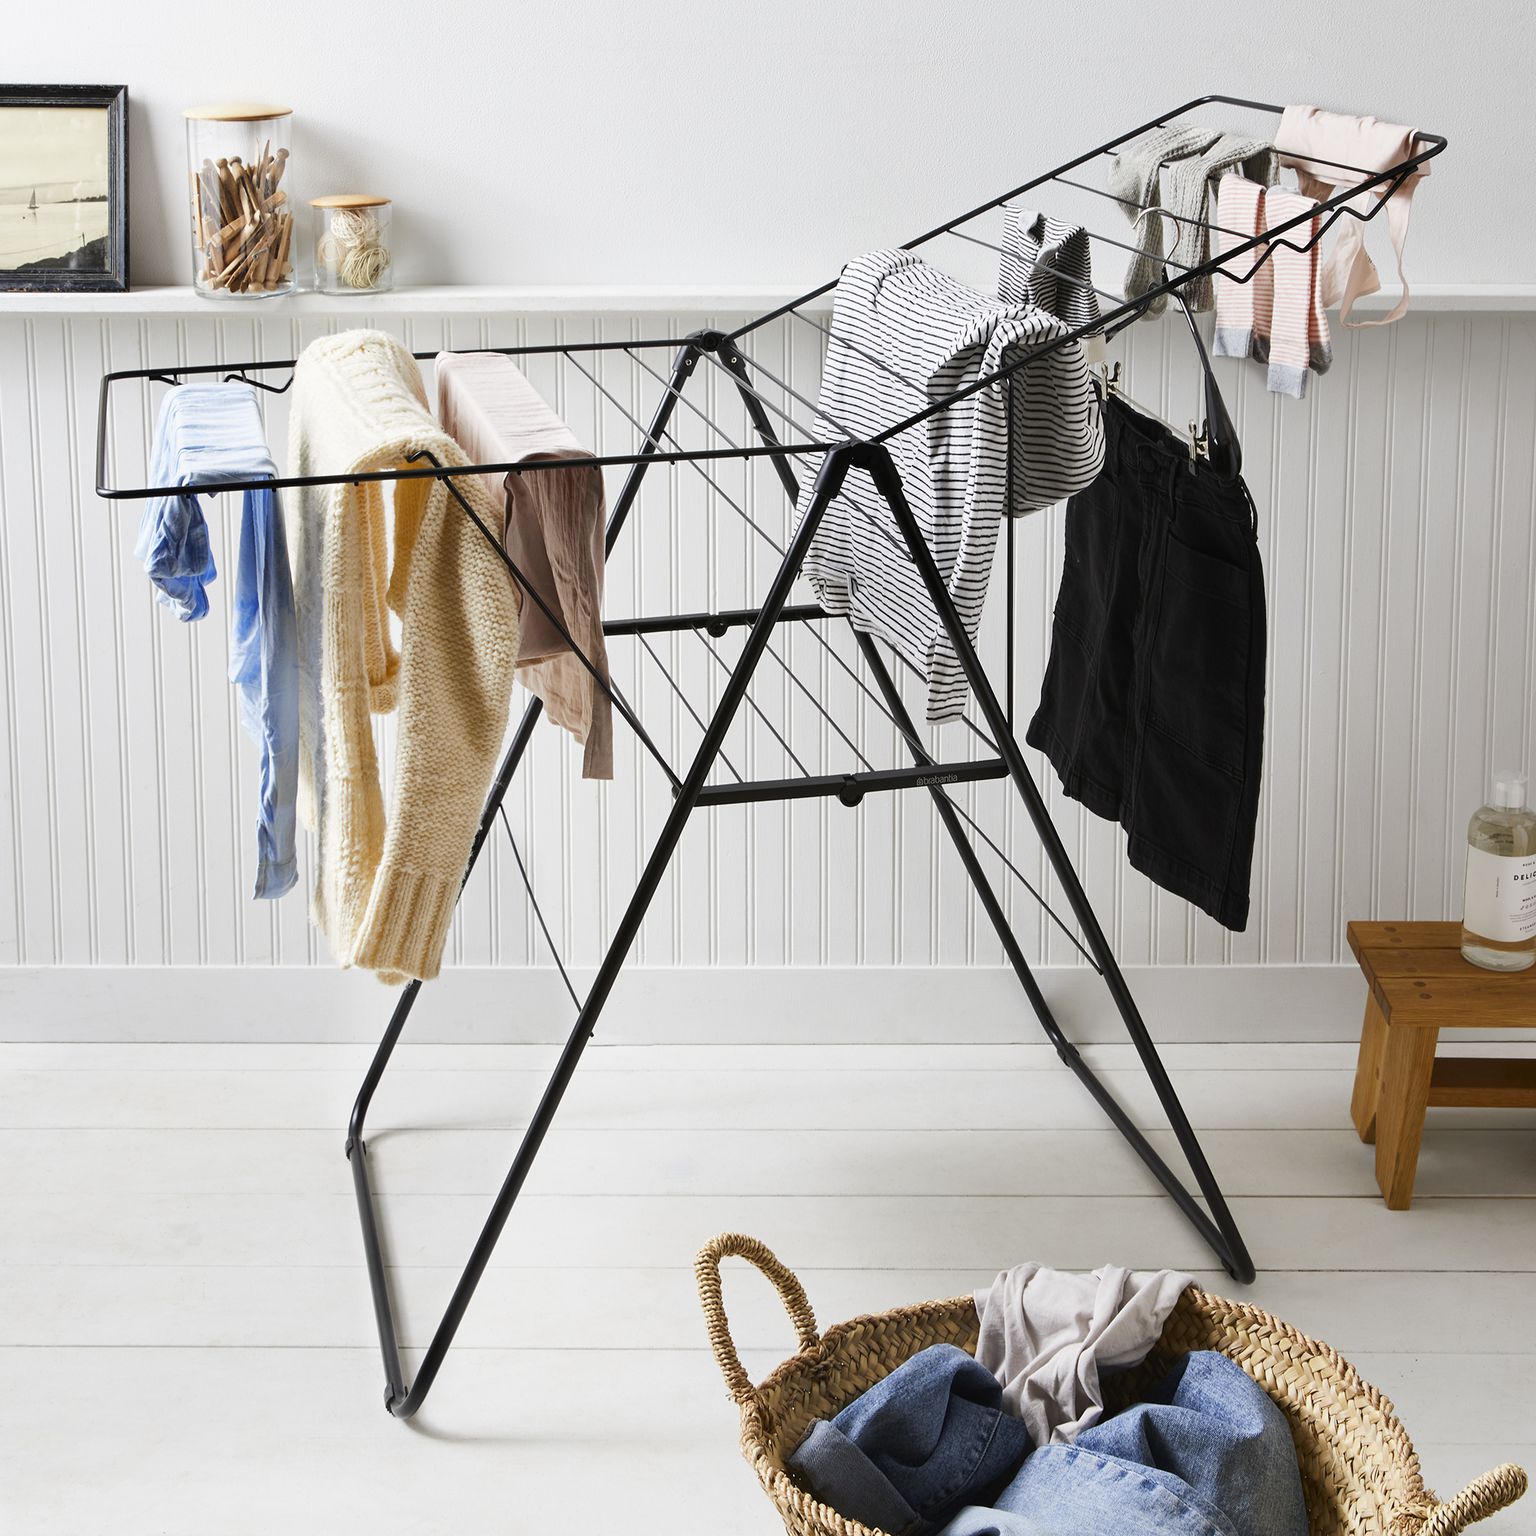 Heated Clothes Drying Racks